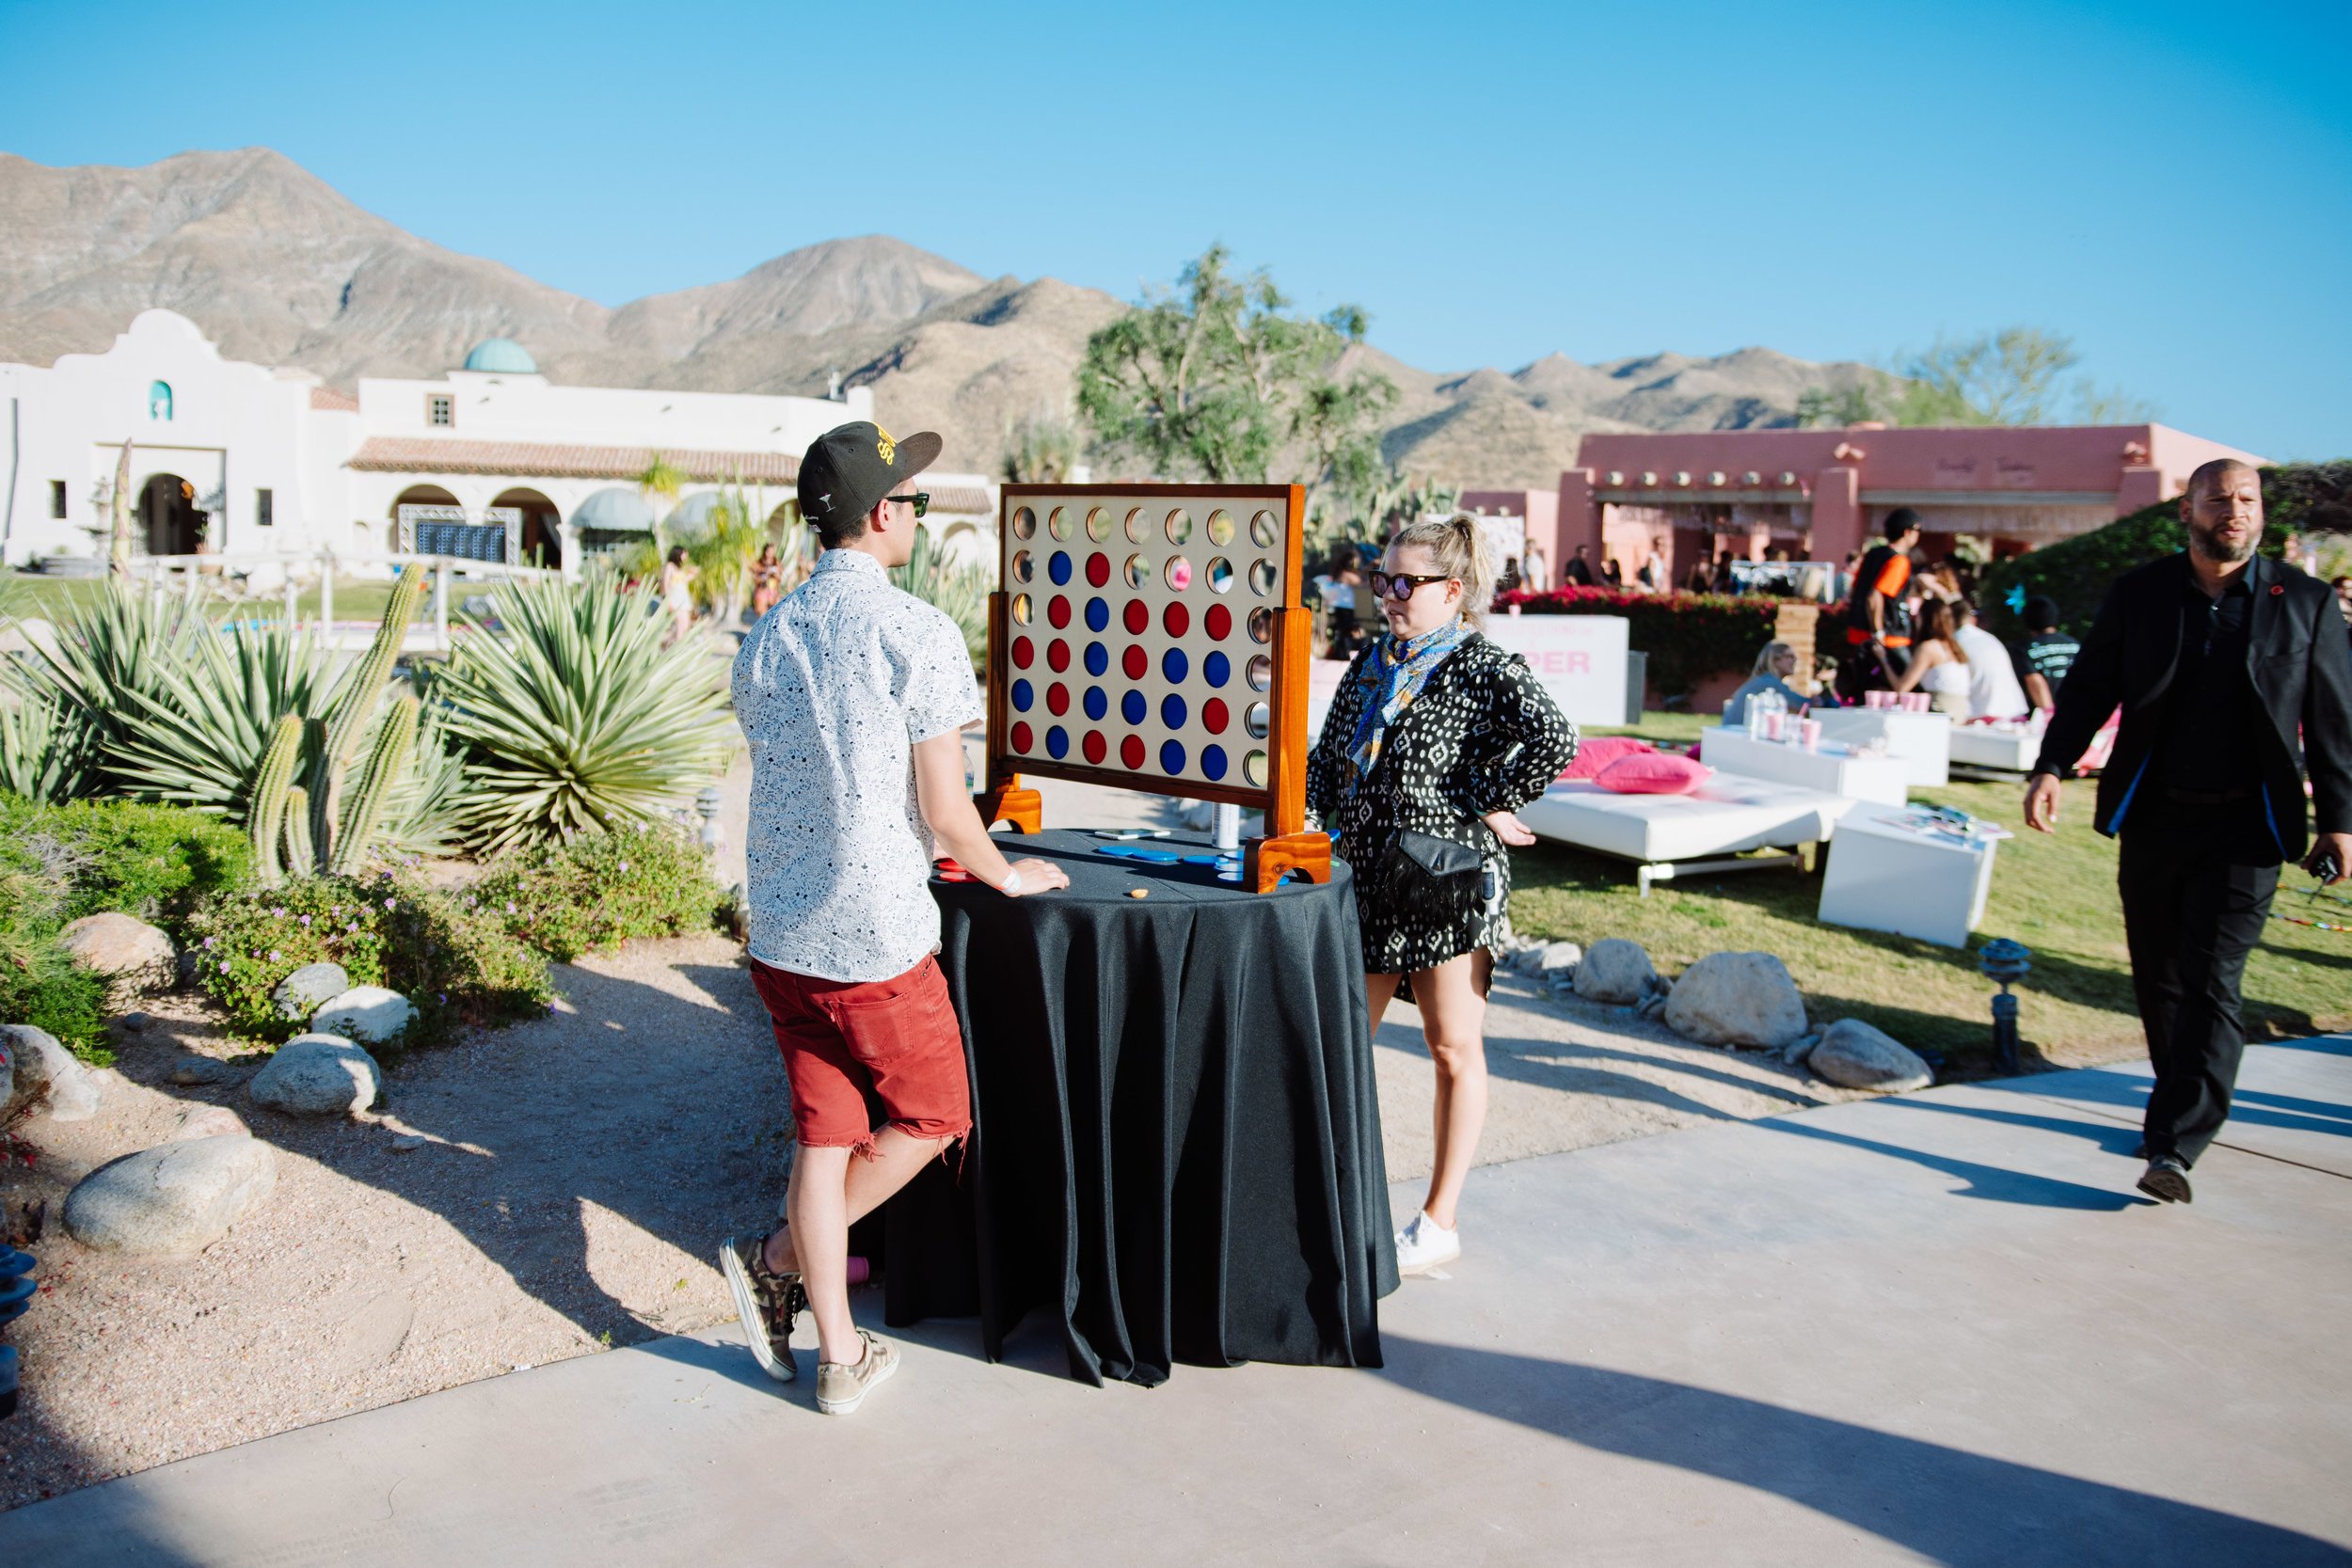 Ultimate Hollywood Coachella Poolside Party life size connect four.jpg